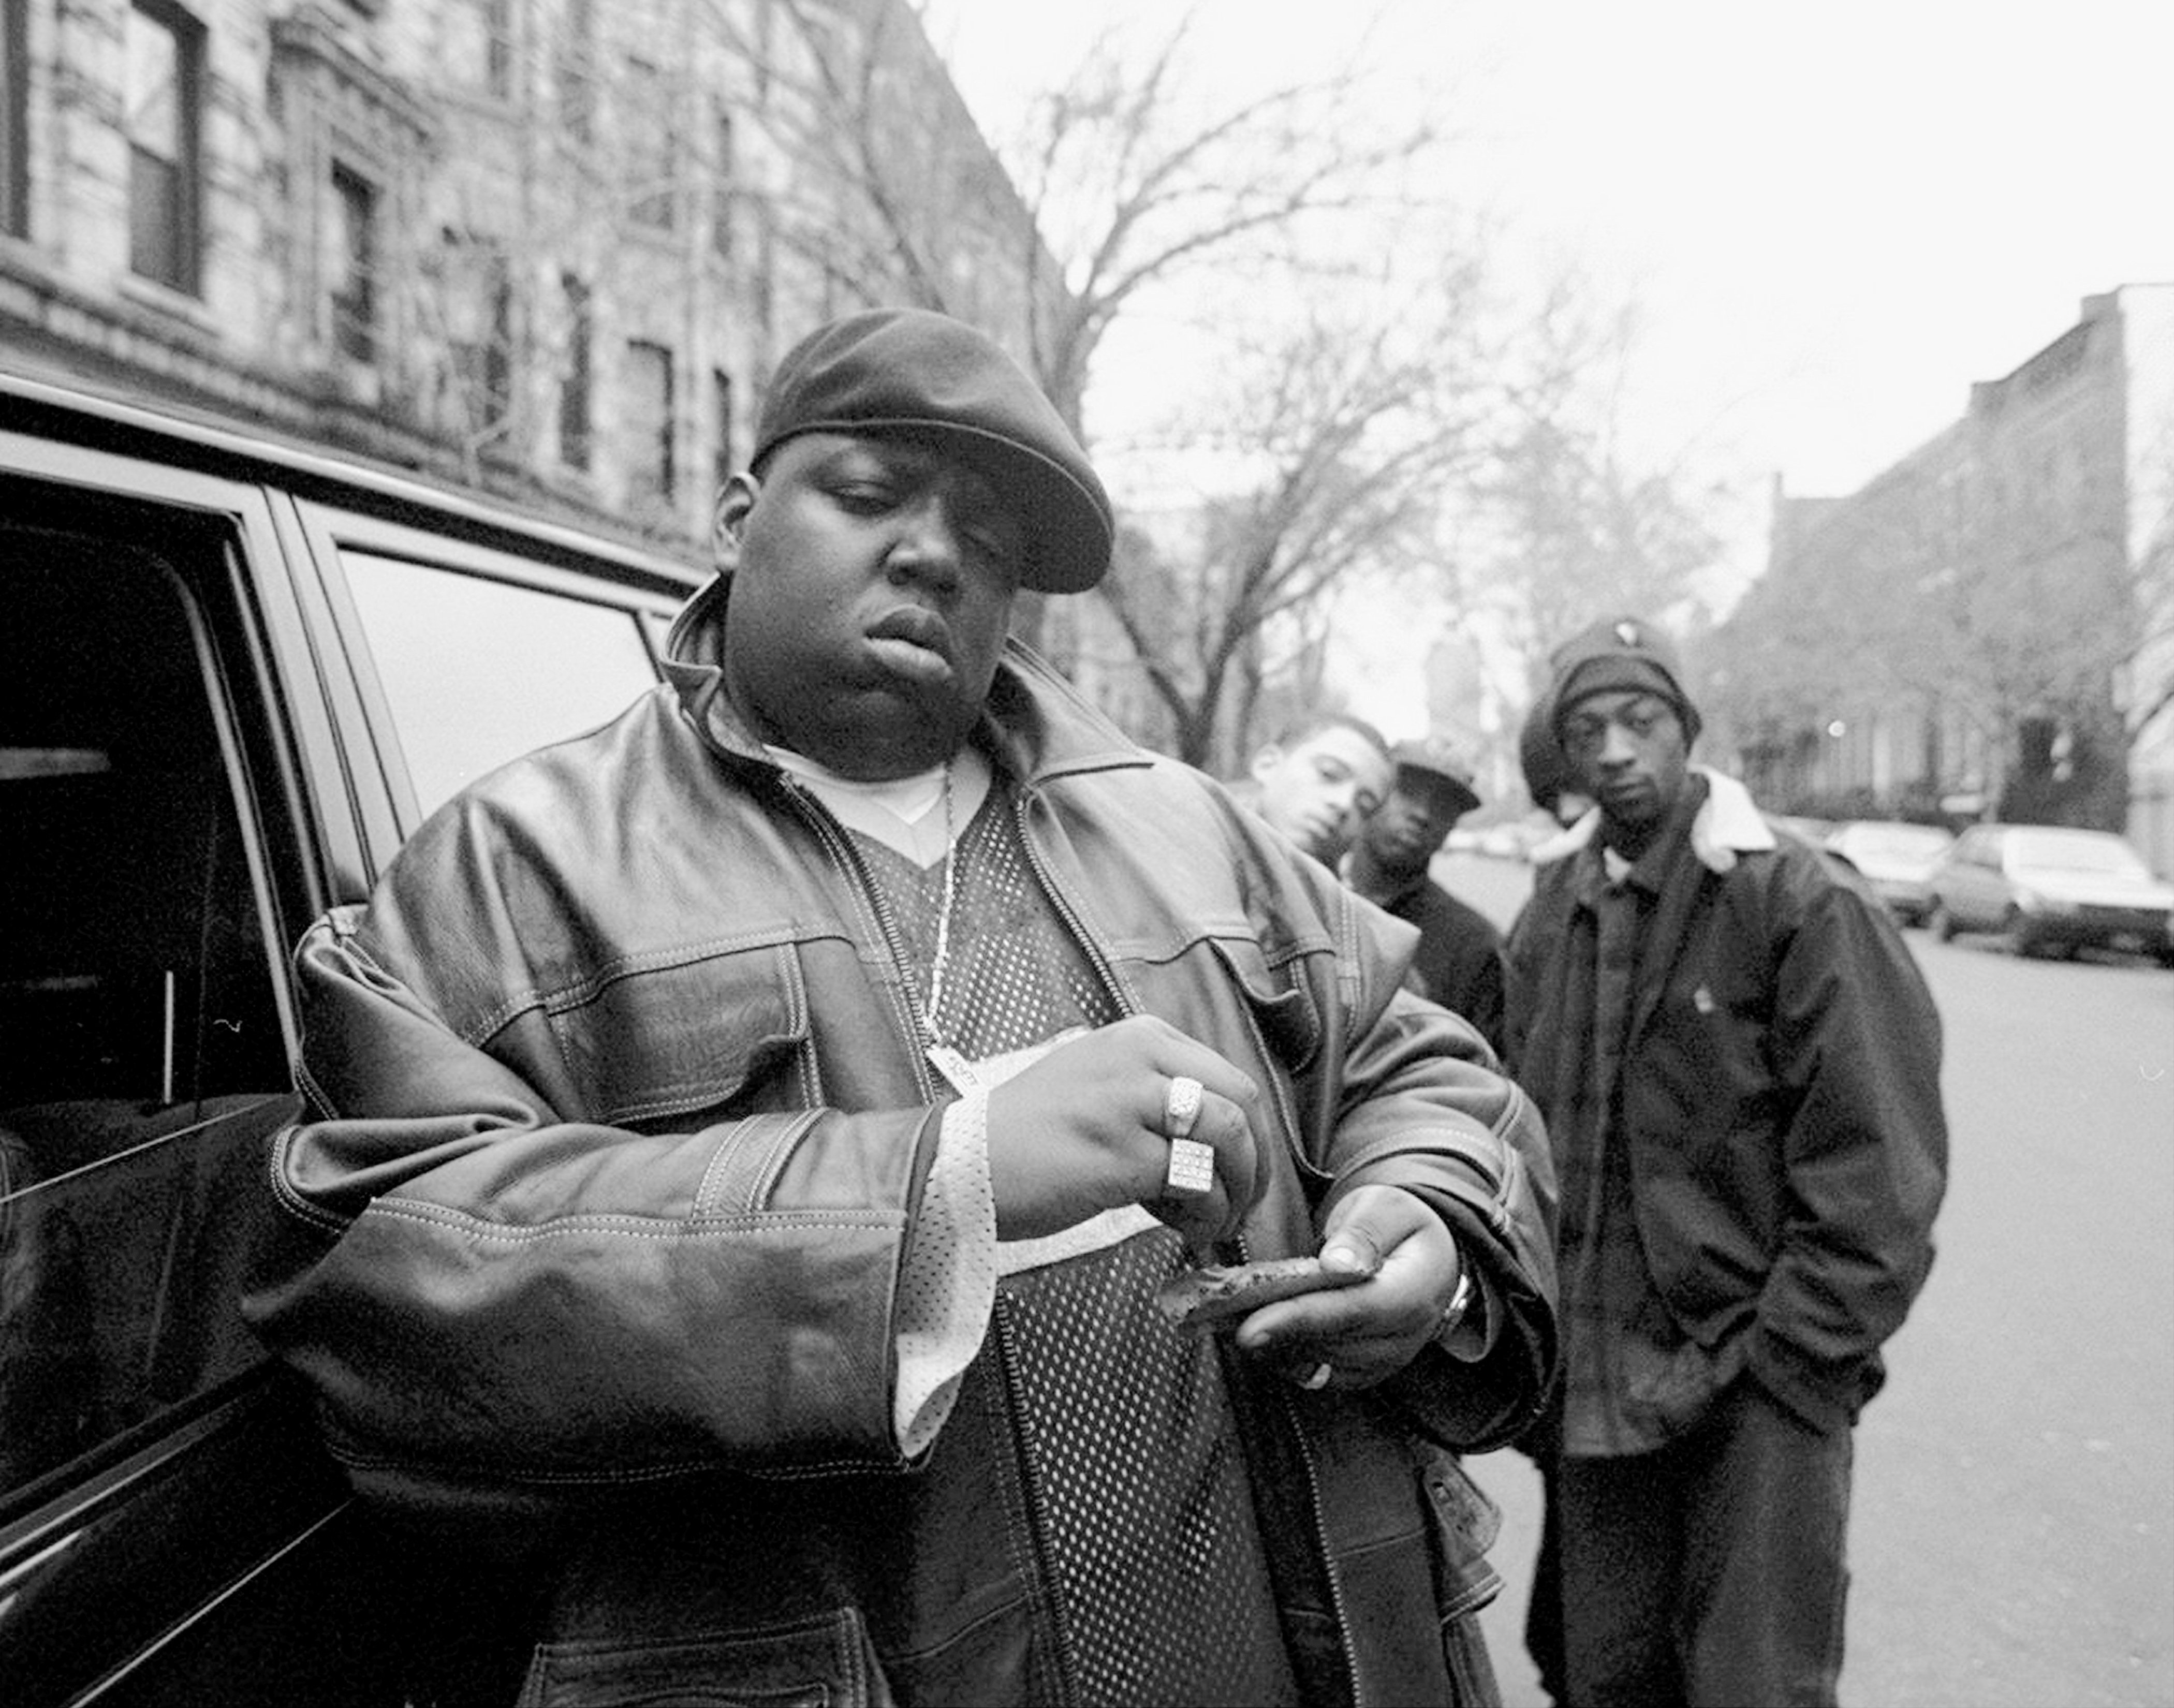 The Notorious B.I.G. with friends in Brooklyn